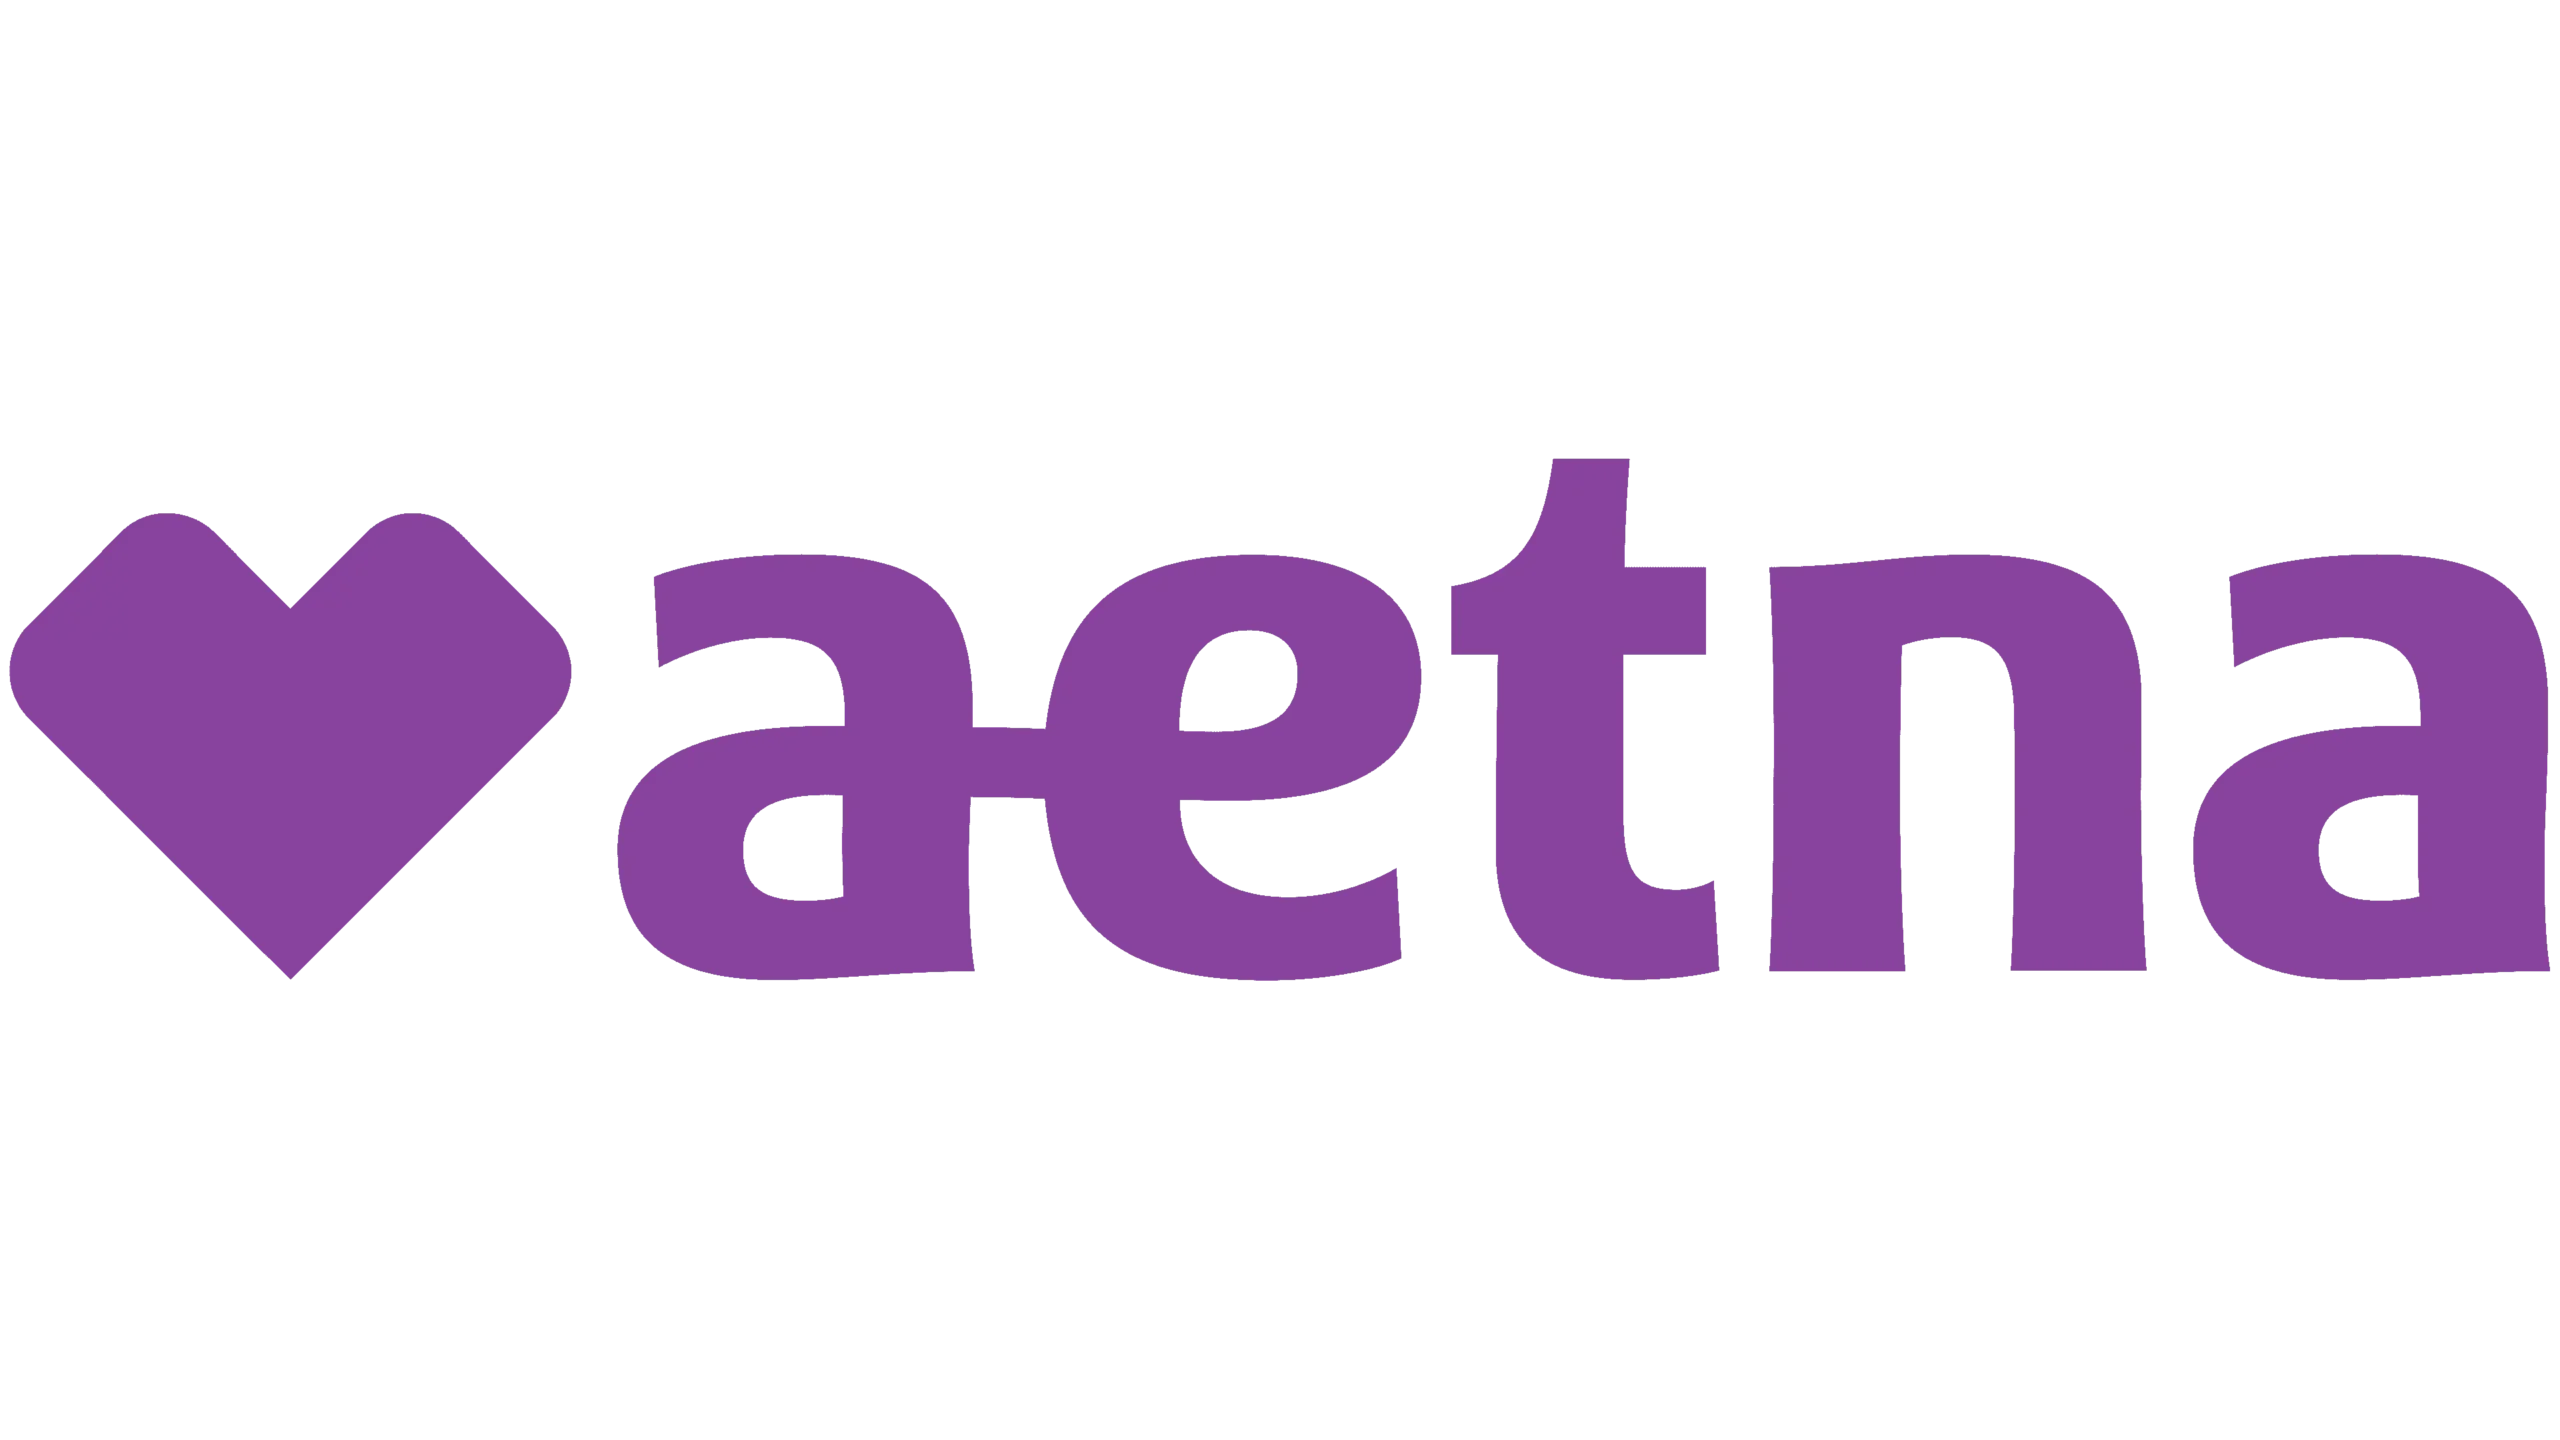 Aetna offers health insurance, as well as dental, vision and other plans, to meet the needs of individuals and families.